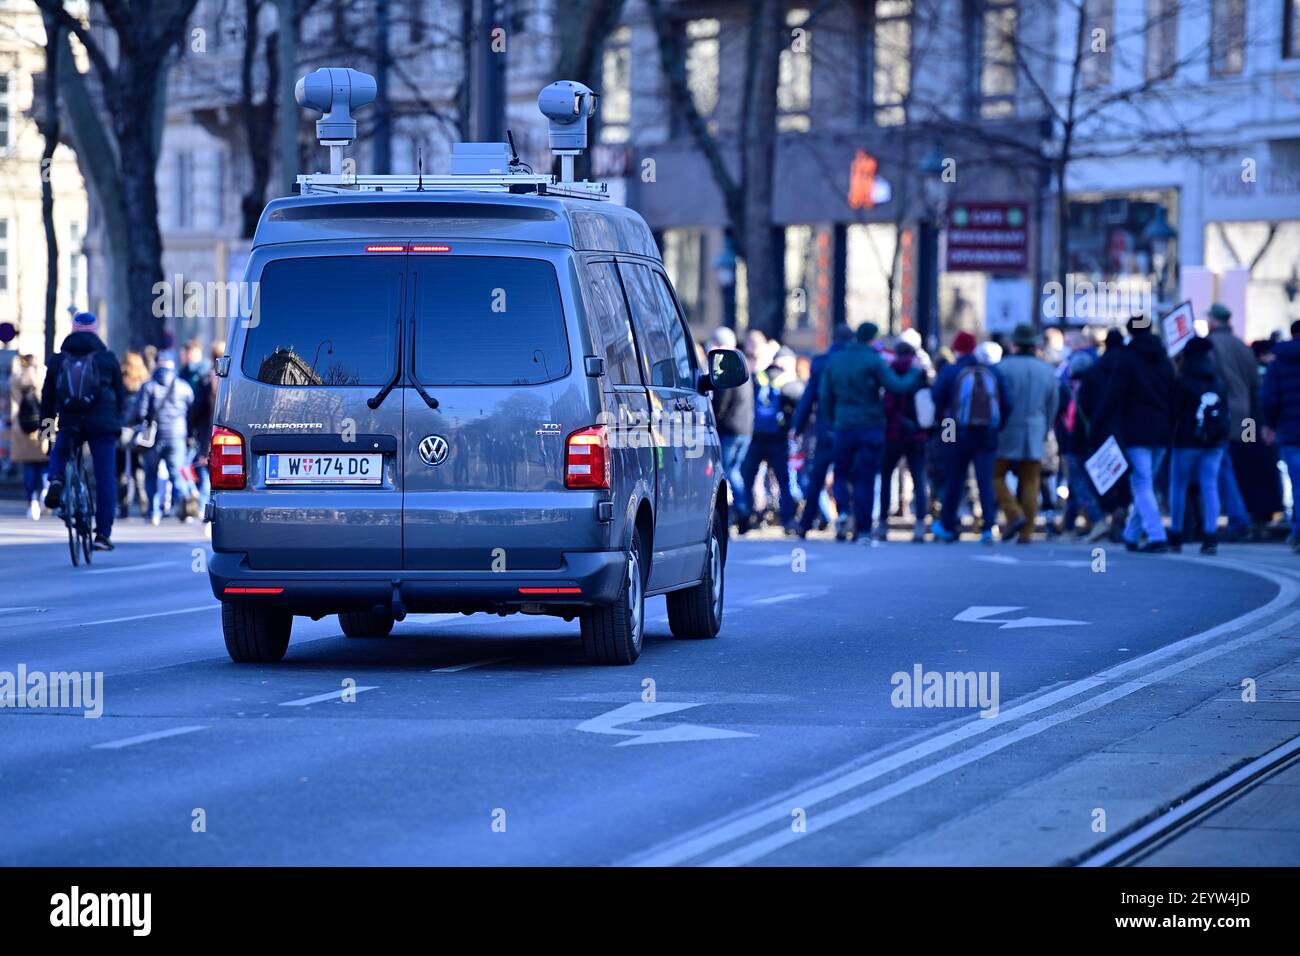 Vienna, Austria. 6th Mar, 2021. This Saturday opponents of the Corona measures will take to the streets again. In Vienna, out of 36 registered demonstrations on various topics, twelve were prohibited on Saturday, the police said on Friday afternoon. Unauthorized large-scale demonstration in Vienna on the inner ring. Austrian police surveillance vehicle. Stock Photo